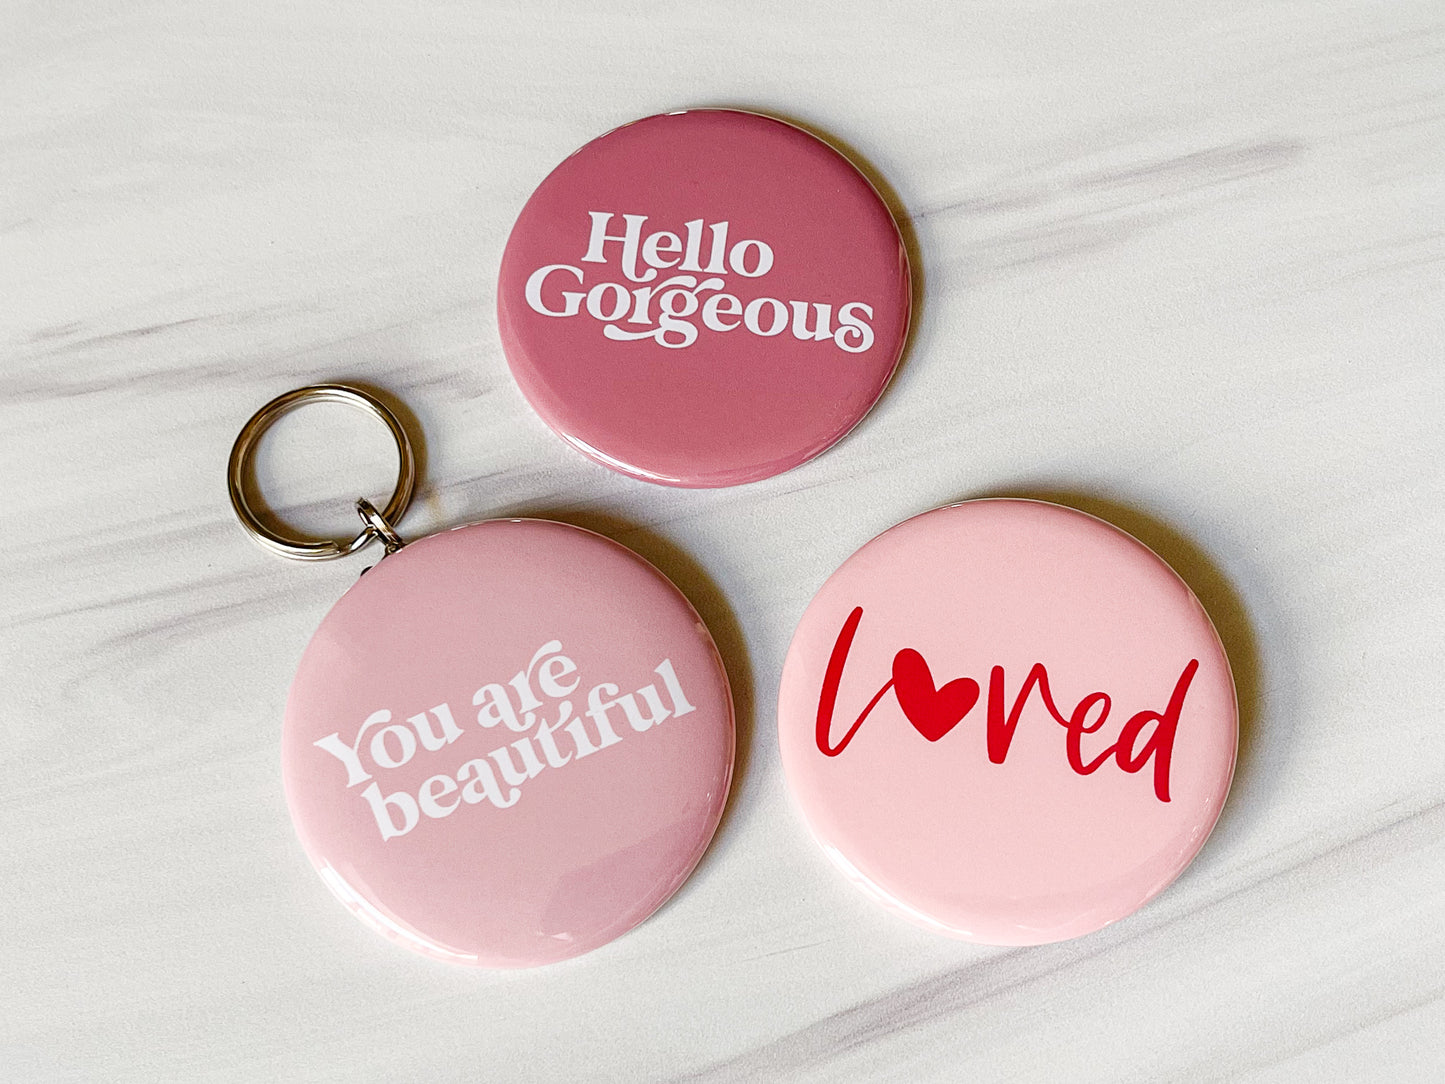 You Are Beautiful Pins, Magnets, Keychains